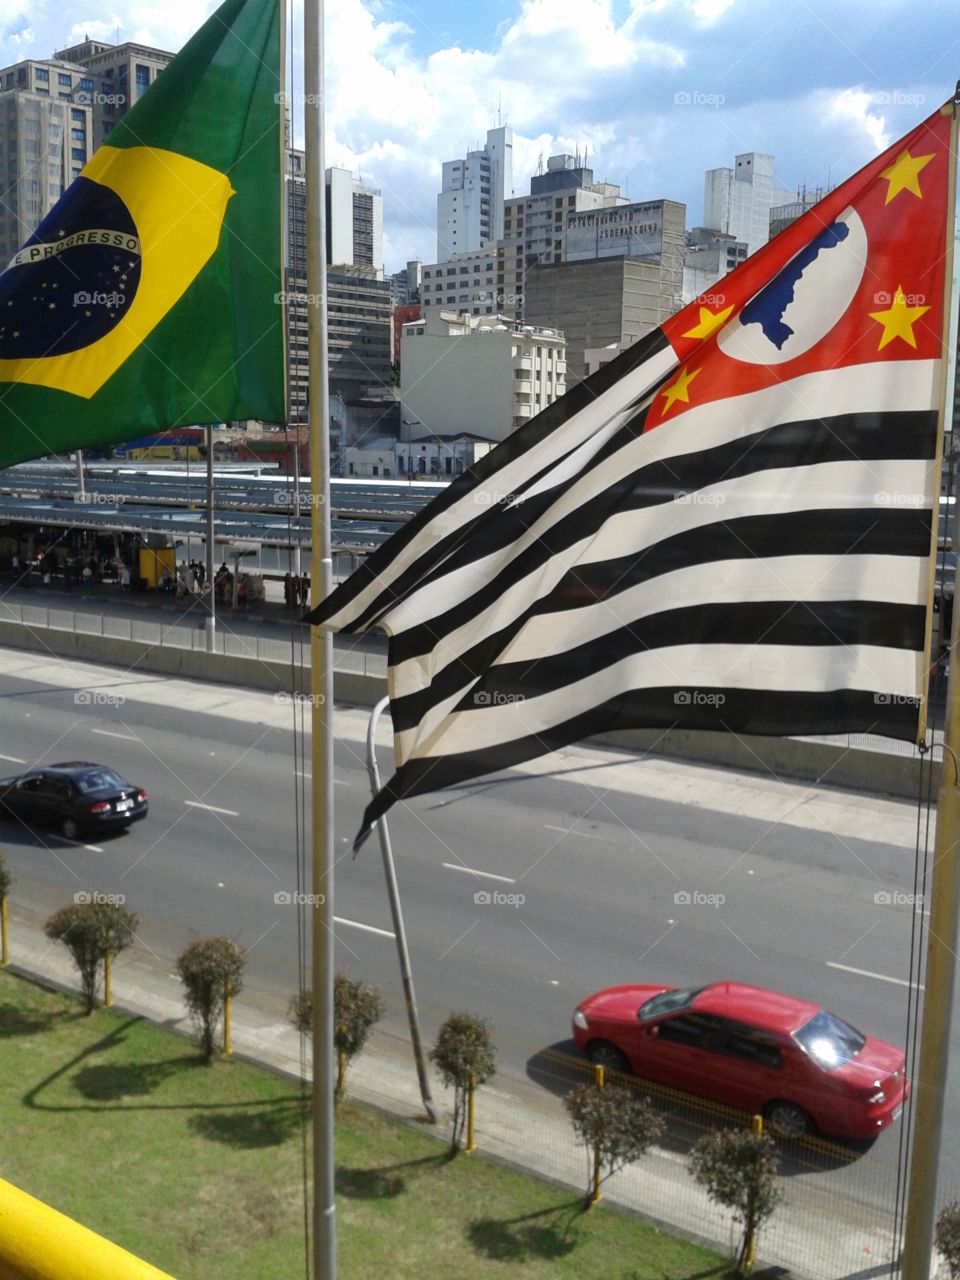 Flags. 
Brazilian flag and the flag of São Paulo on the way to bus terminal Mercado - downtown.